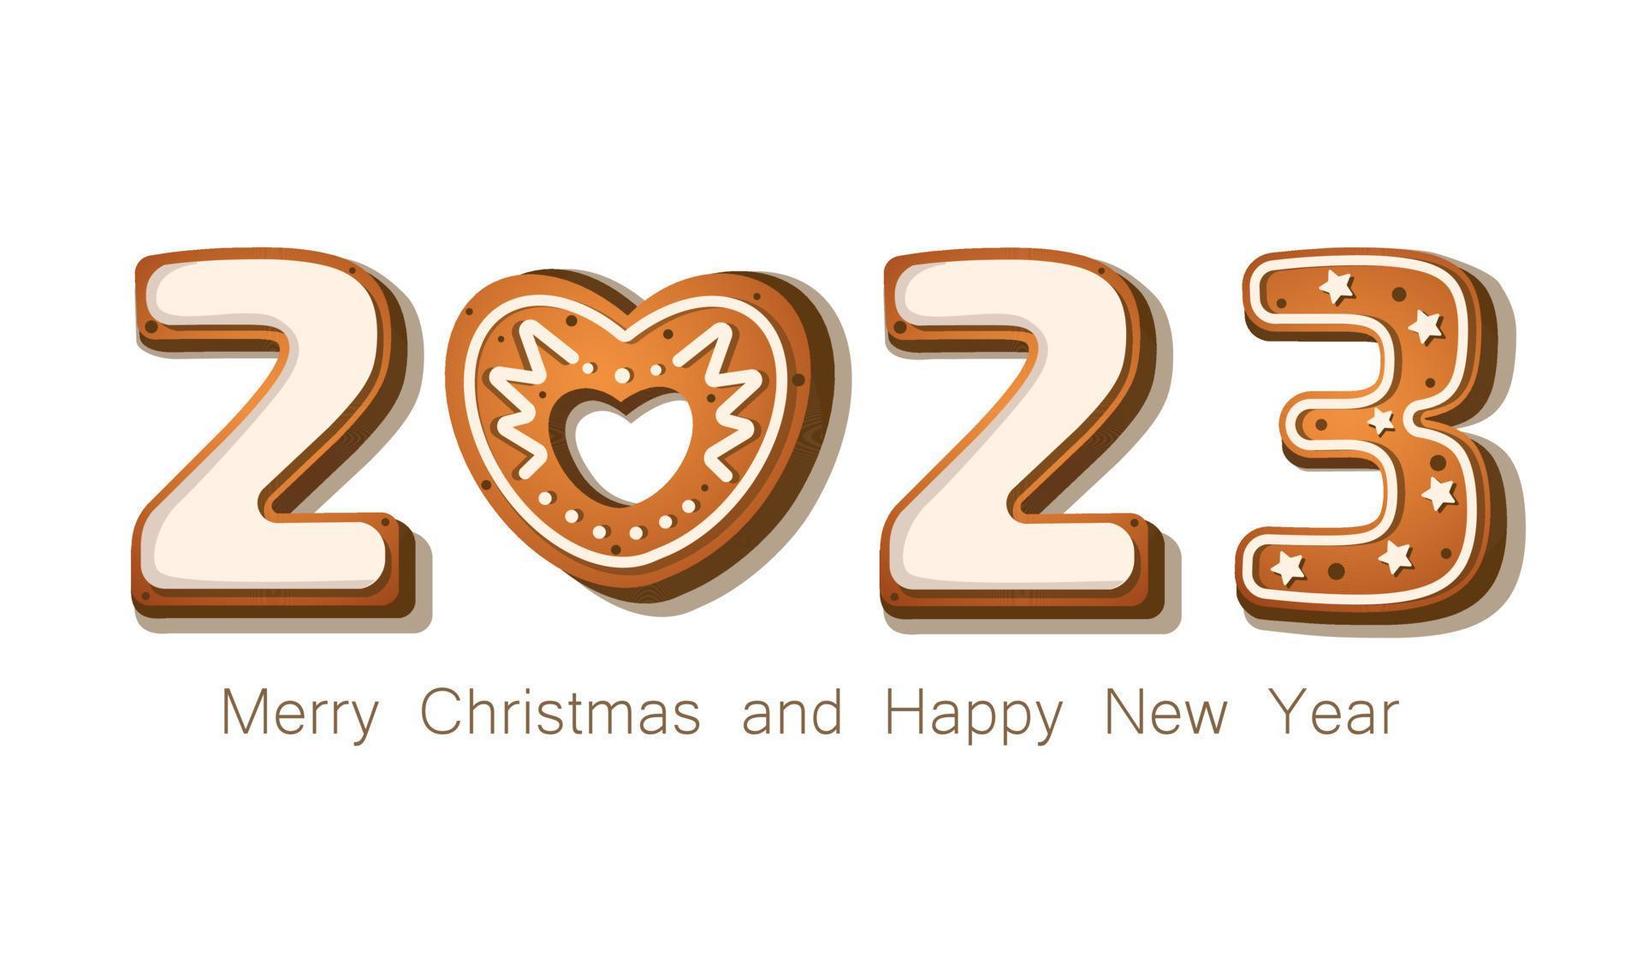 The picture shows gingerbread in the form of the new year 2023. Will it taste just as good vector